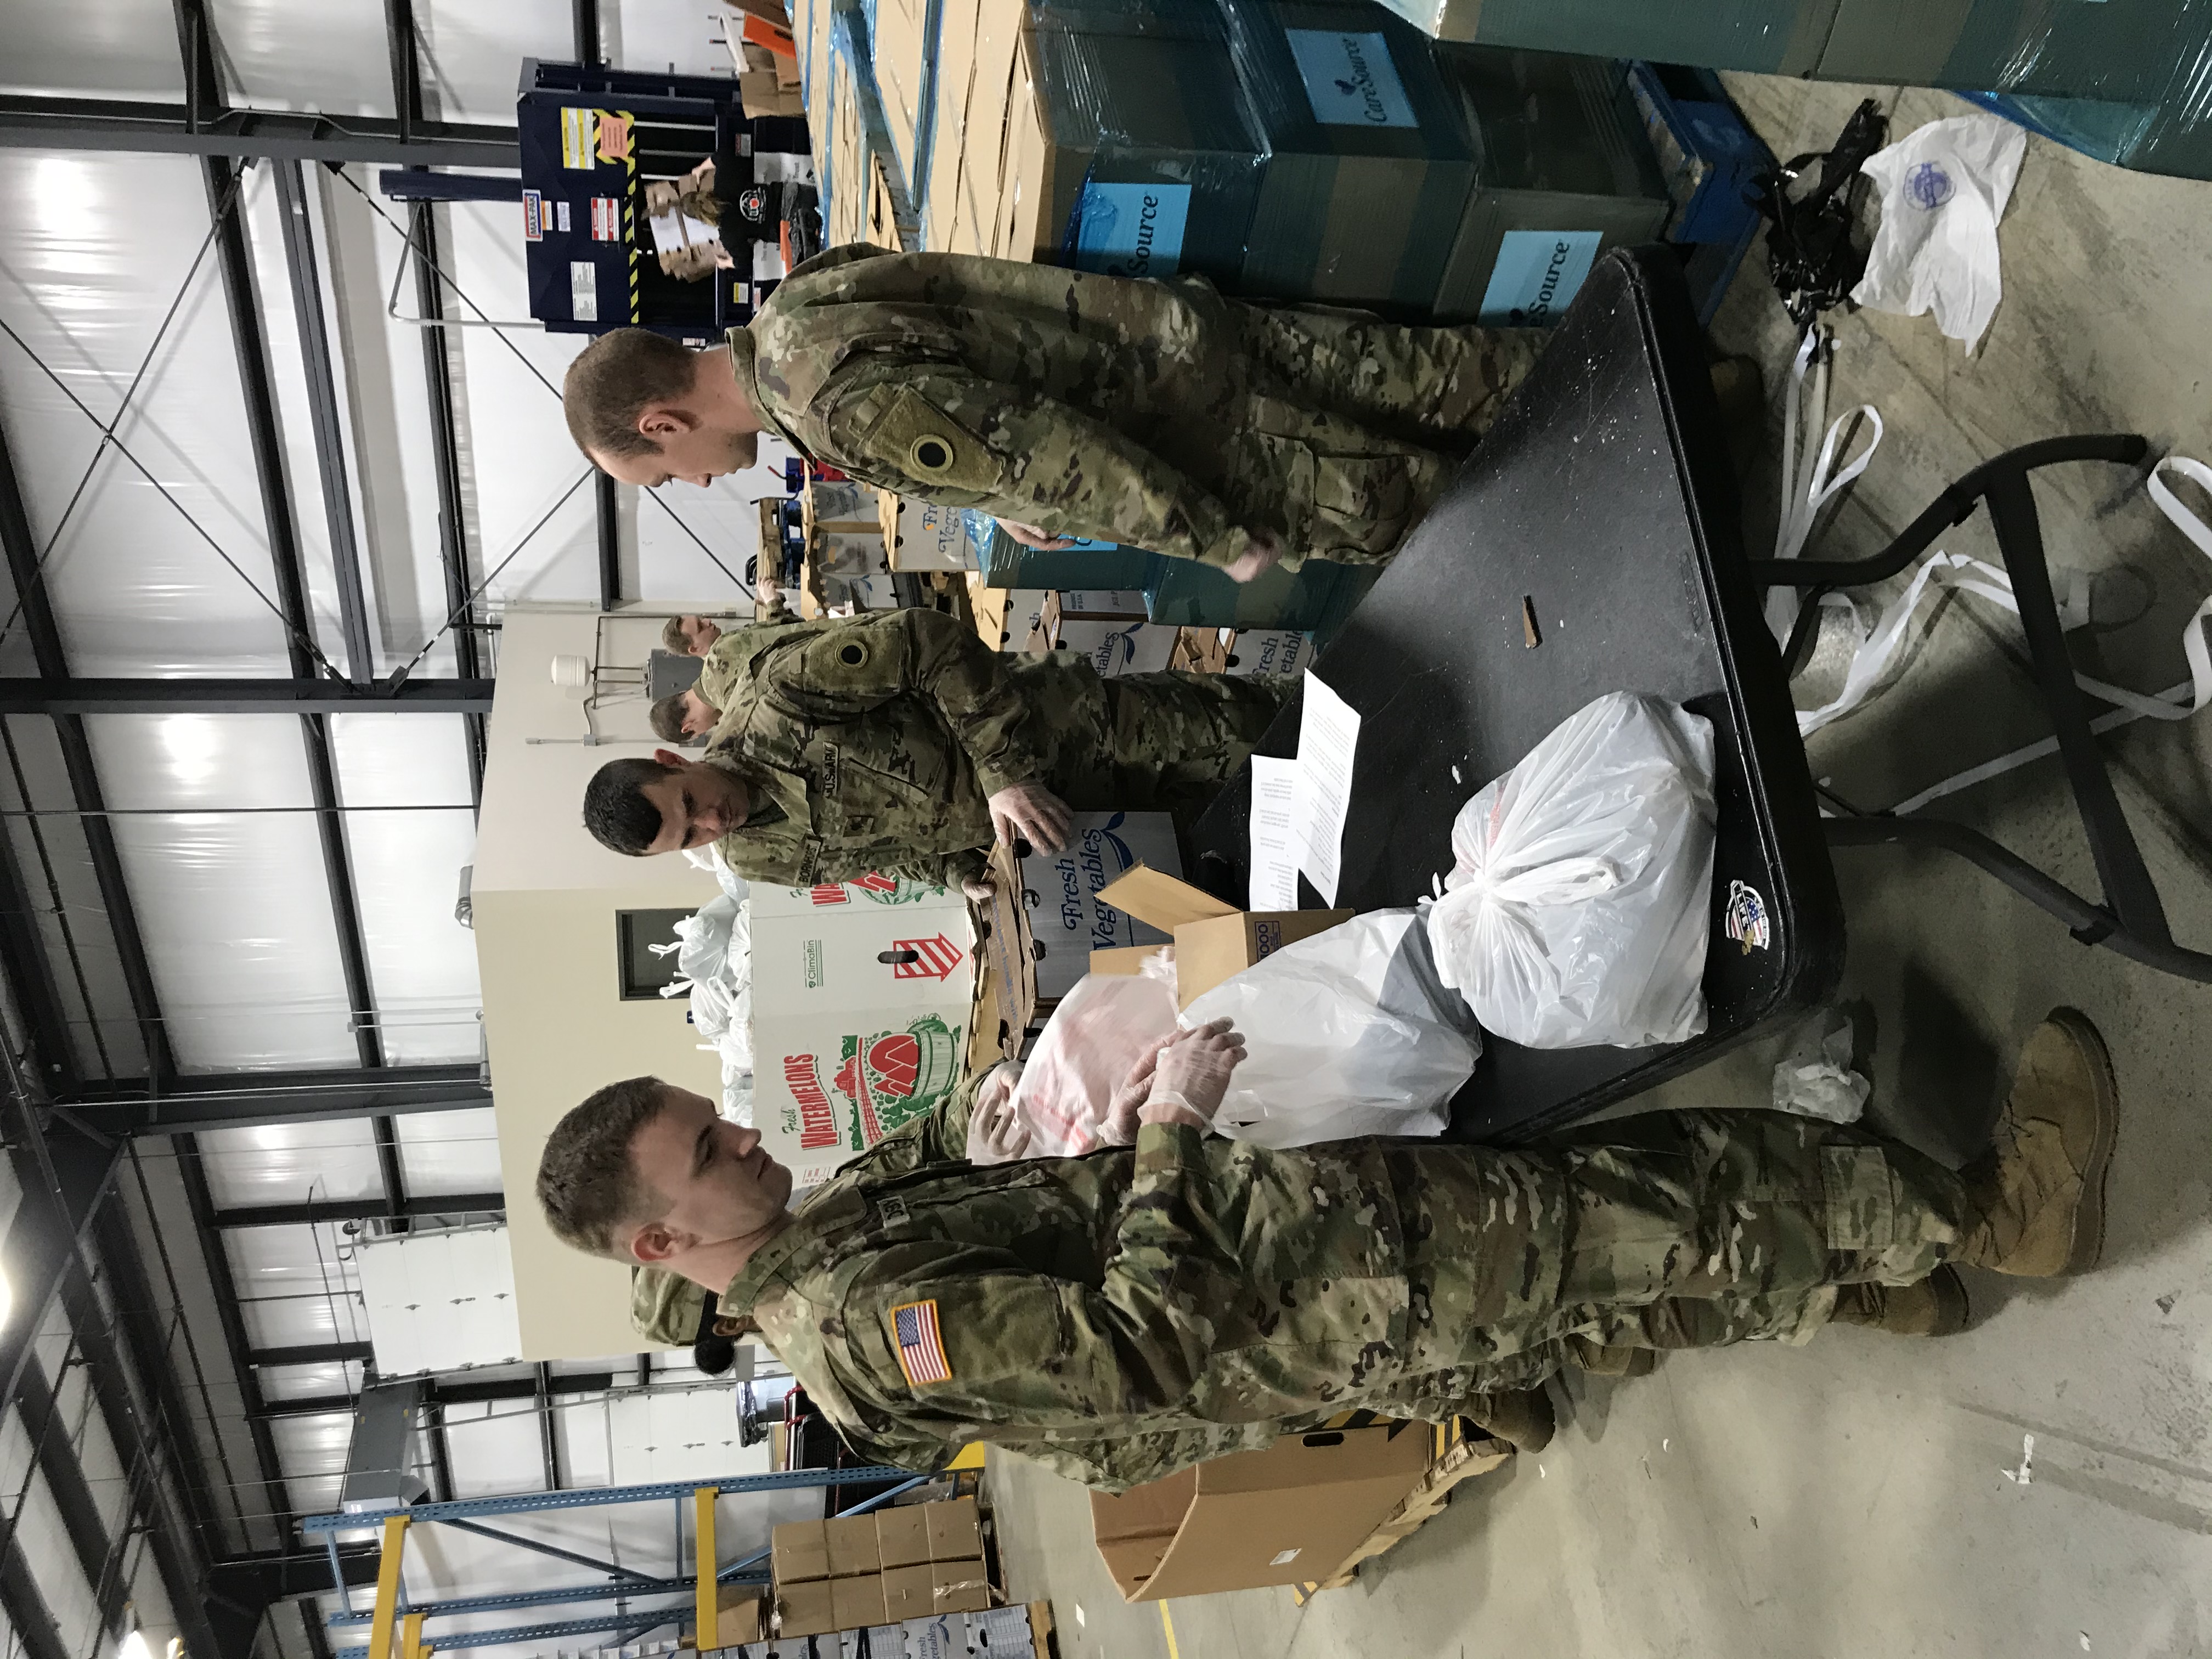 Soldiers package produse at table inside warehouse.